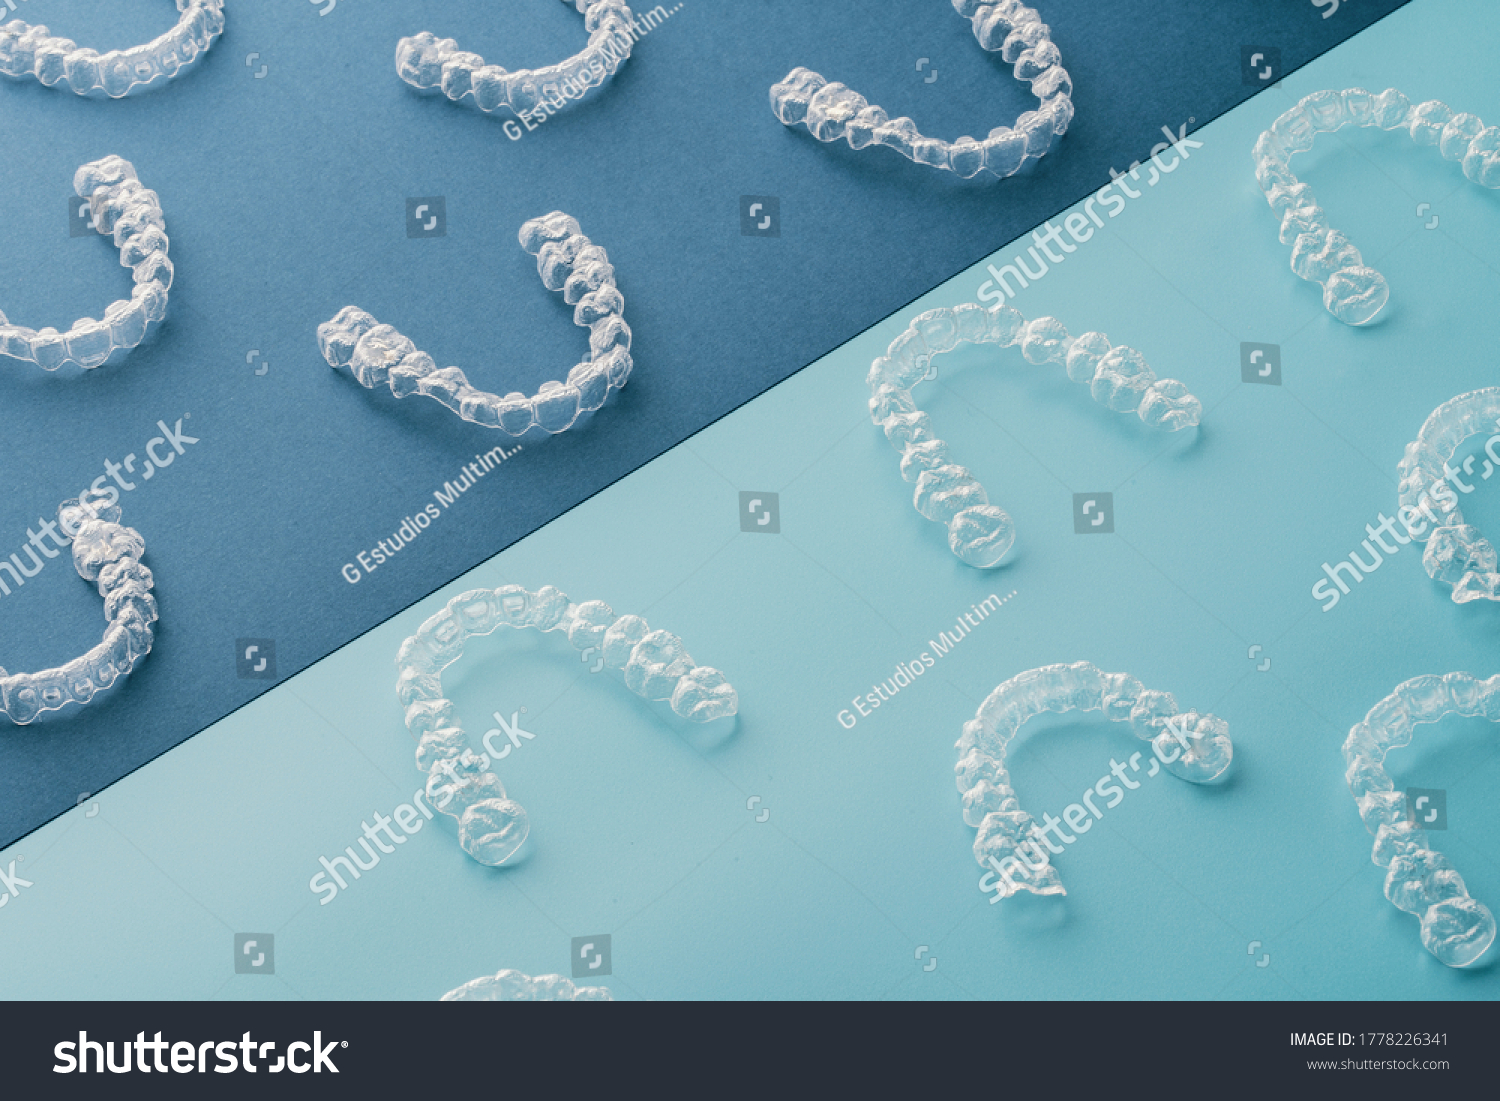 Transparent invisible dental aligners or braces aplicable for an orthodontic dental treatment #1778226341